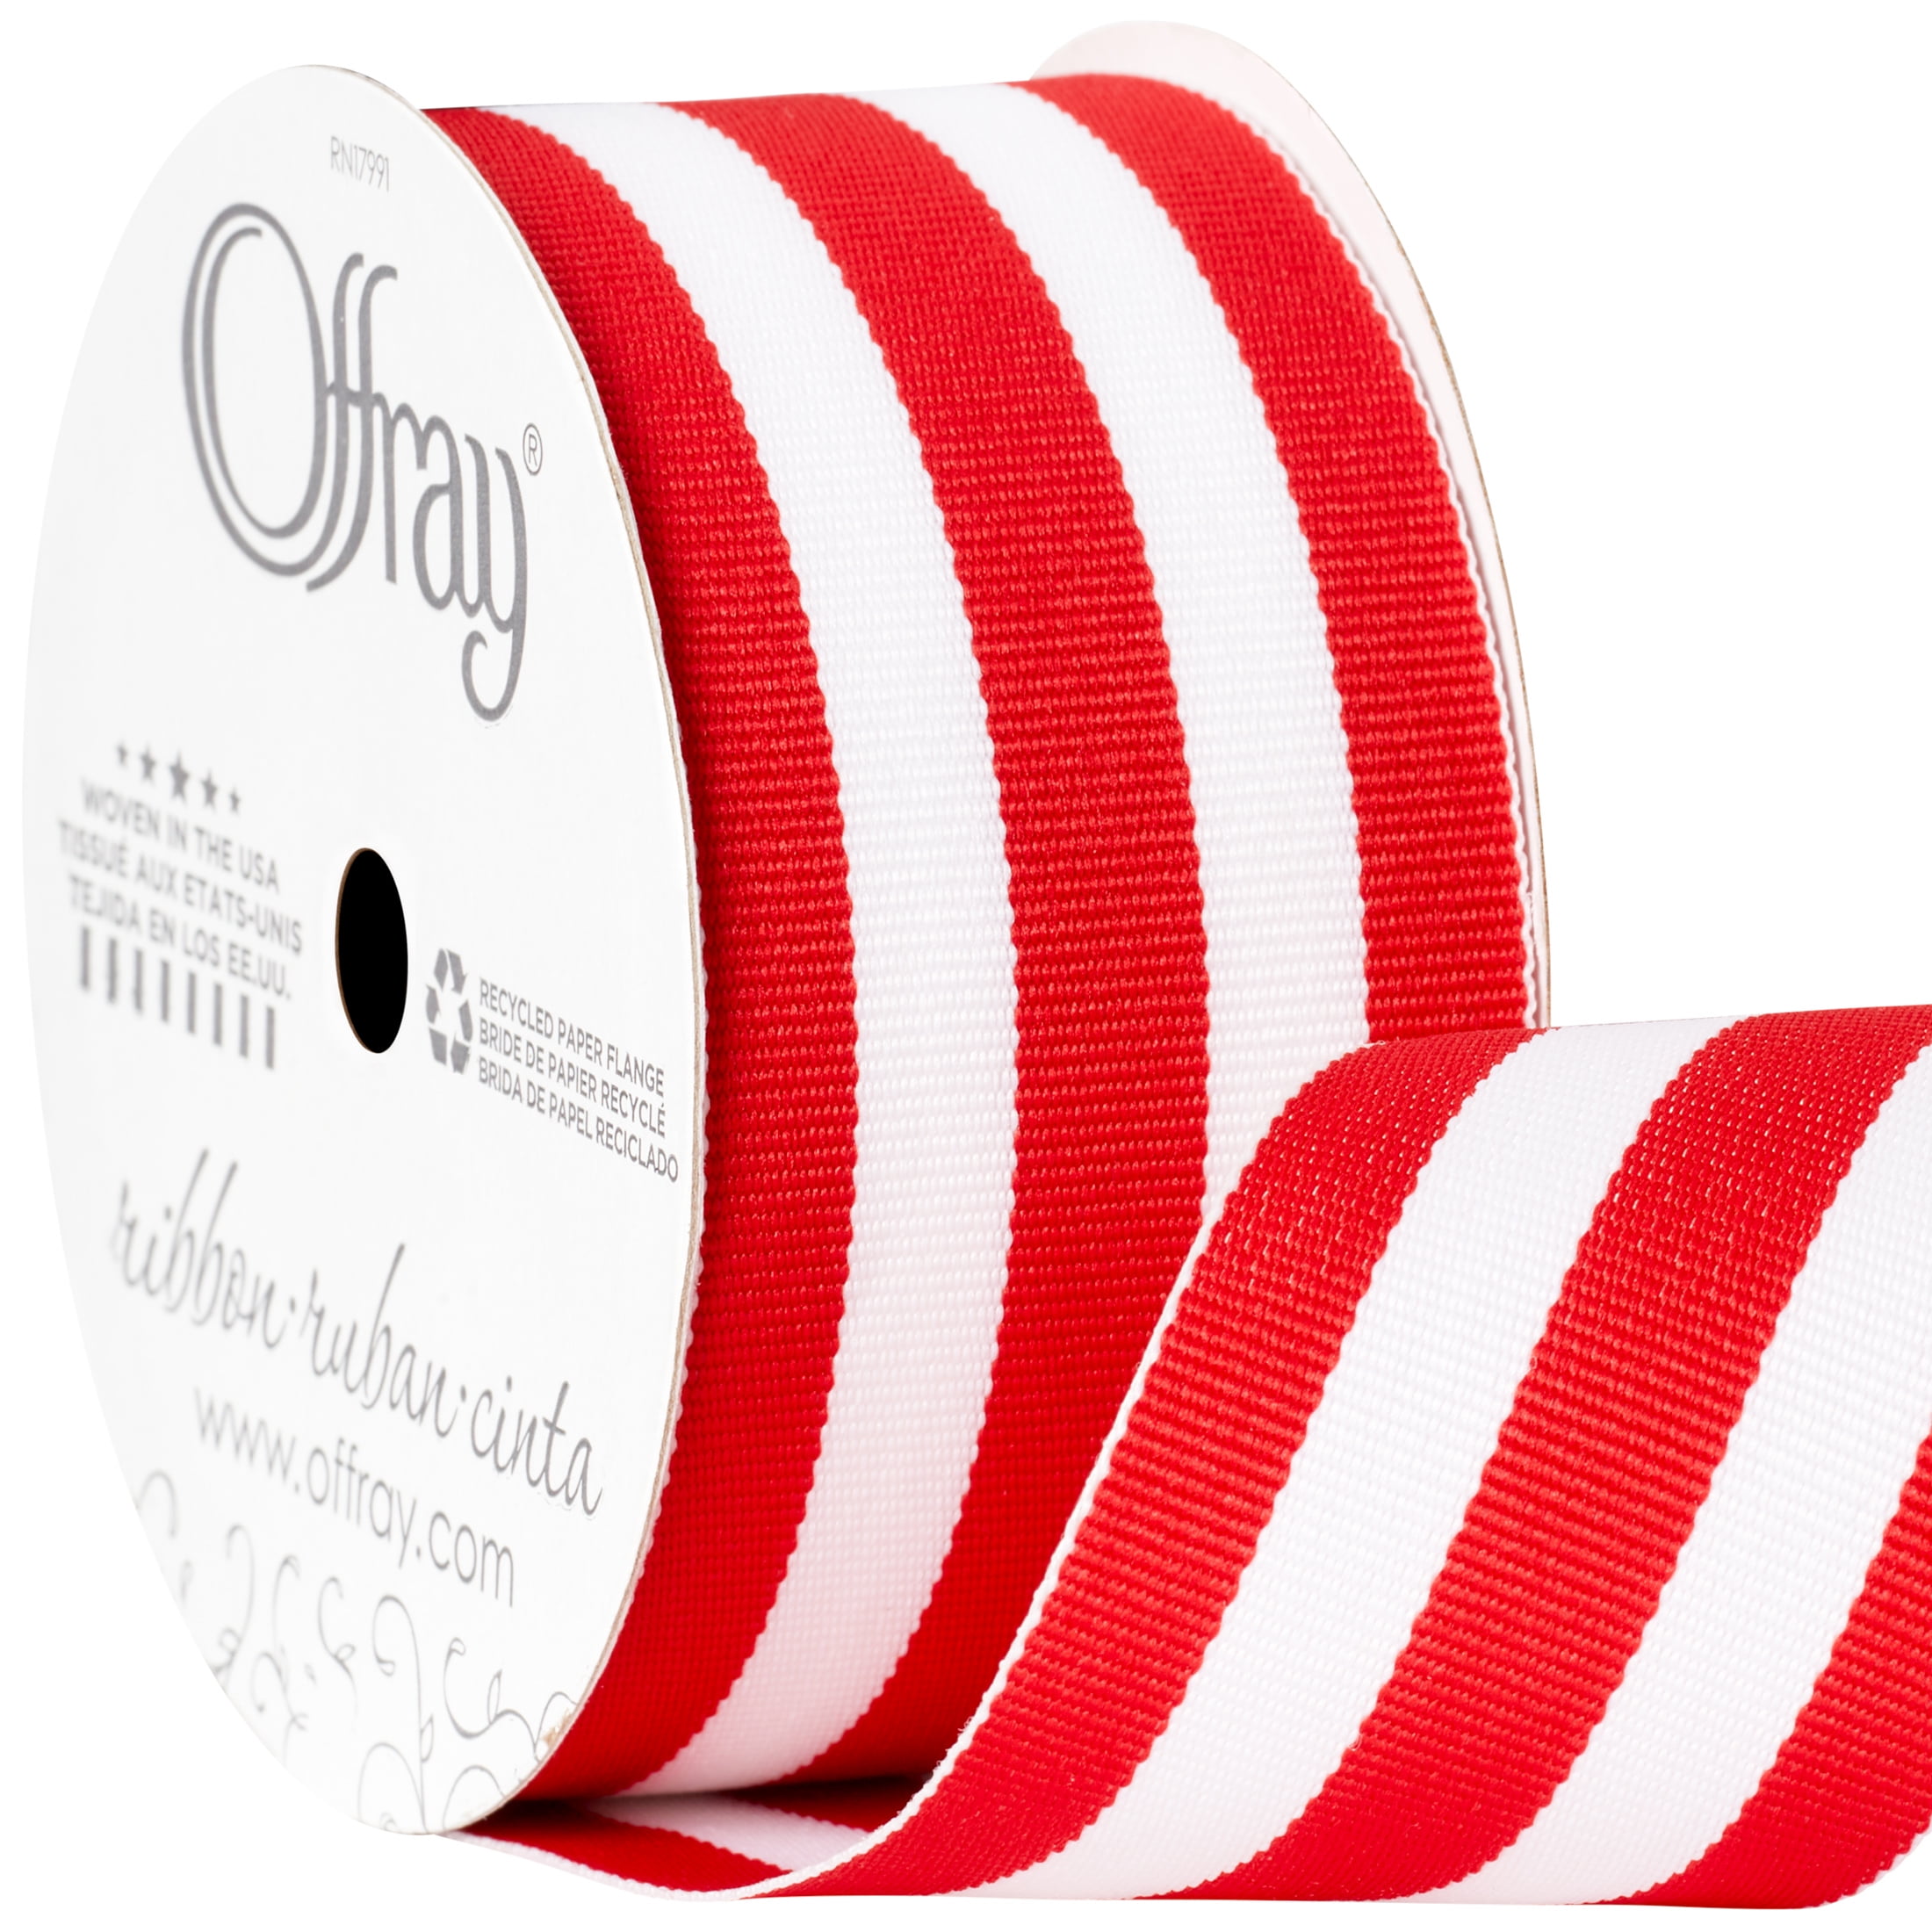 Offray Ribbon, Red and White Stripes 1 1/2 inch Grosgrain Polyester Ribbon,  9 feet, 1 Each